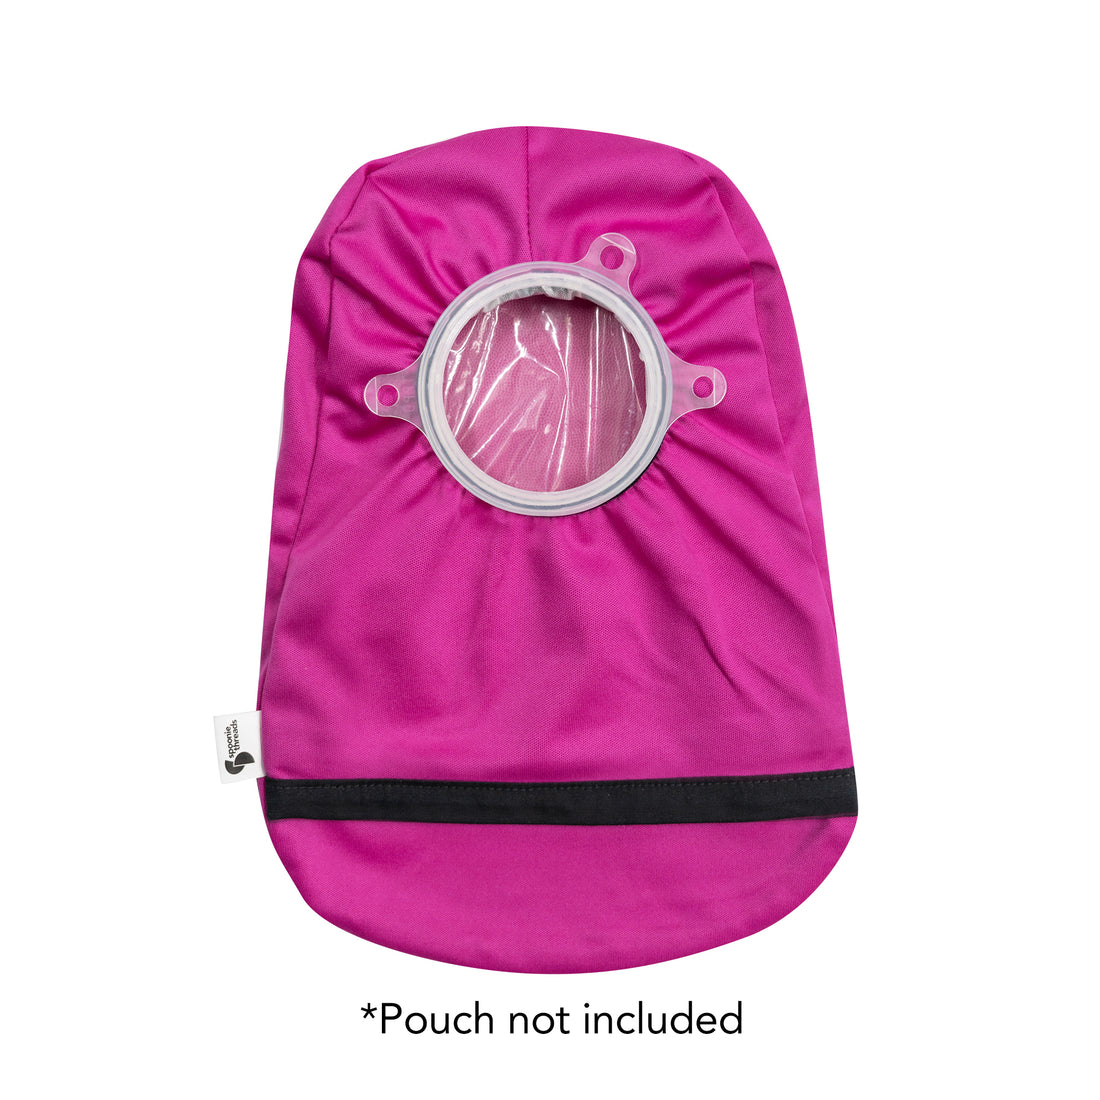 Fuchsia "Get Your Shit Together" Elastic Ostomy Bag Cover